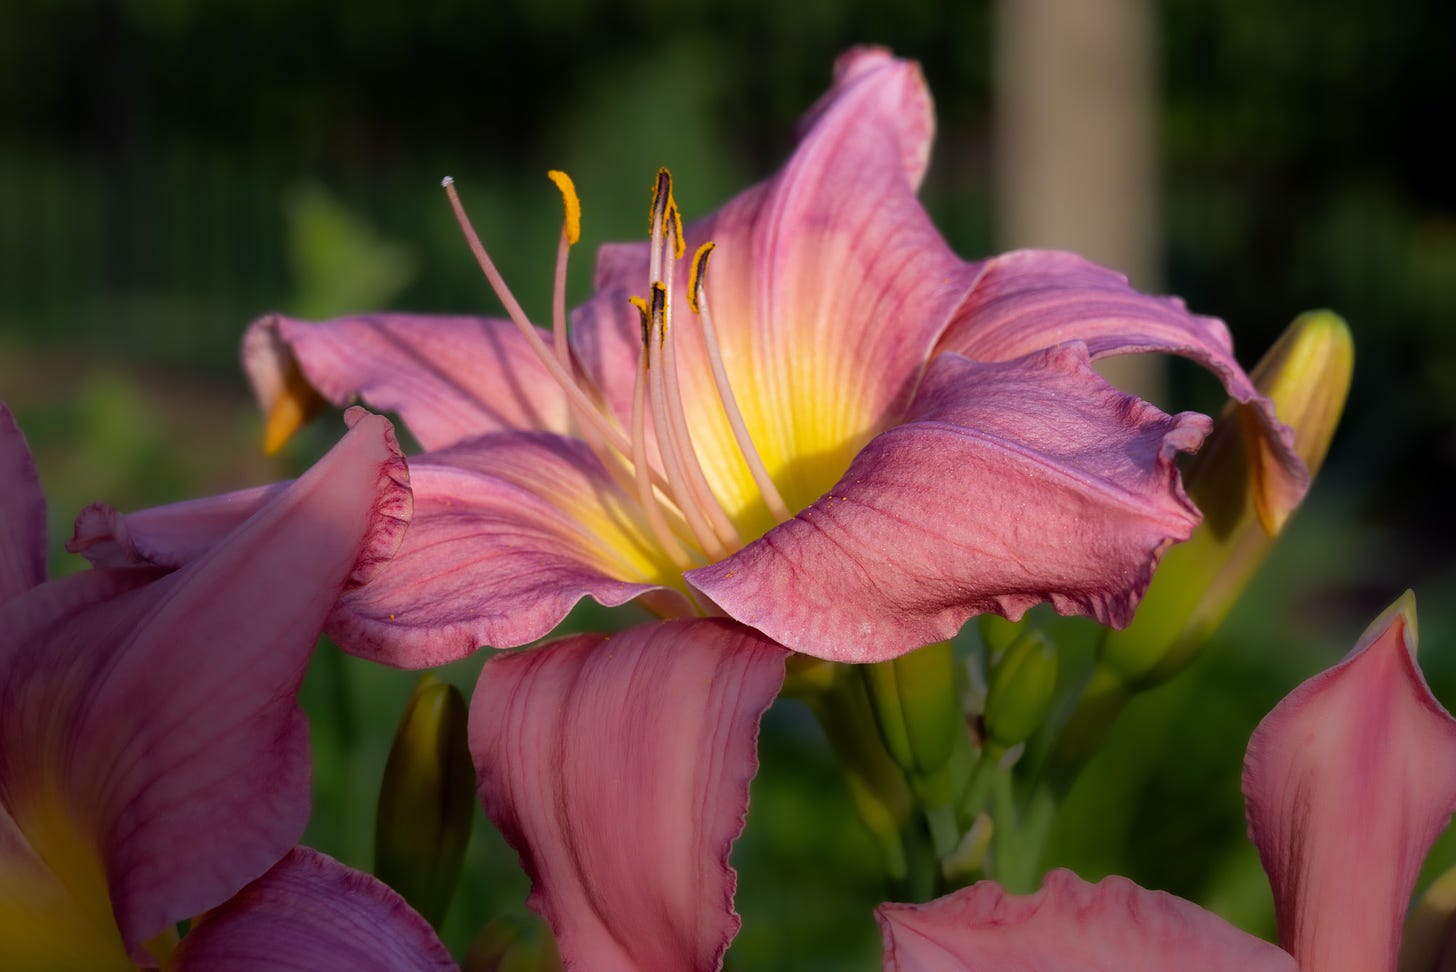 A dark pink daylily, called Mary Frances, with a yellow center against a blurred background